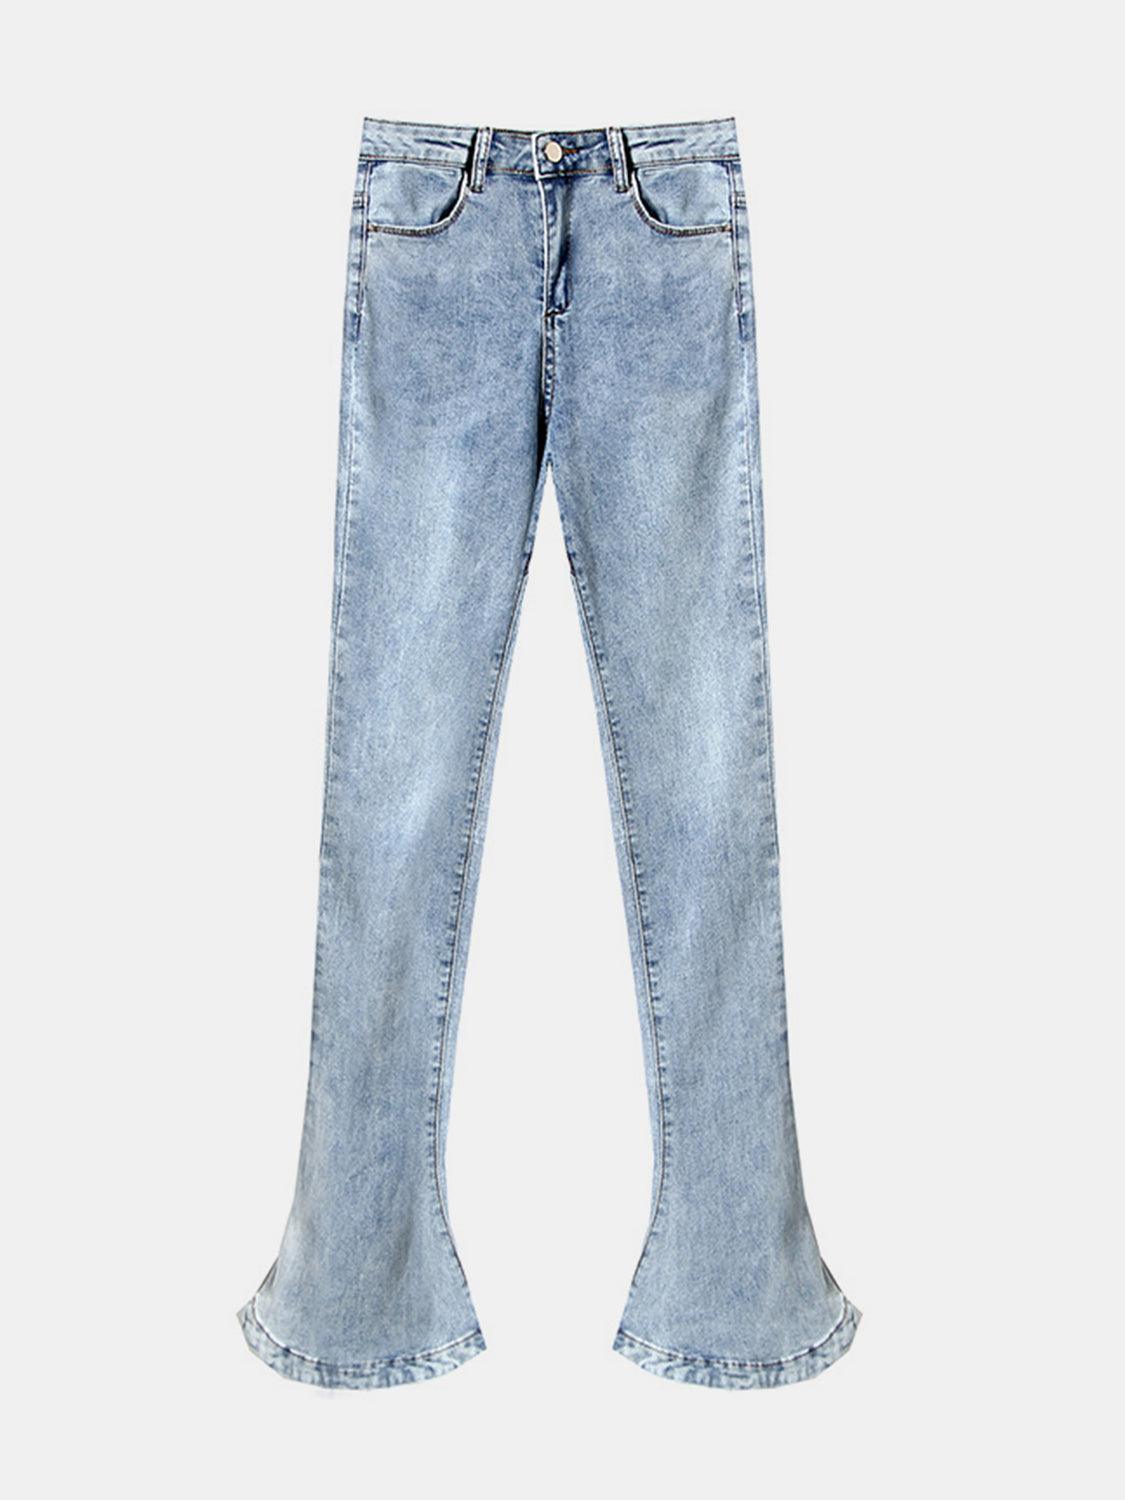 a pair of light blue jeans with ruffled hems